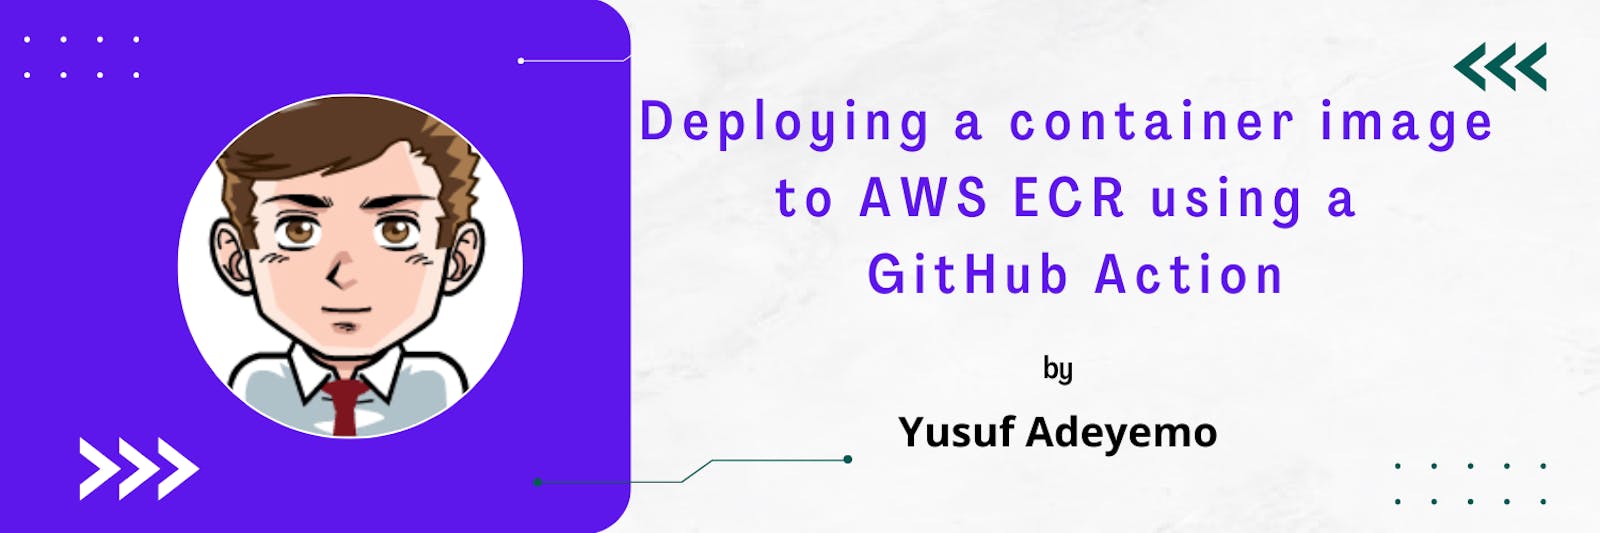 Deploying a container image to AWS ECR using a GitHub Action